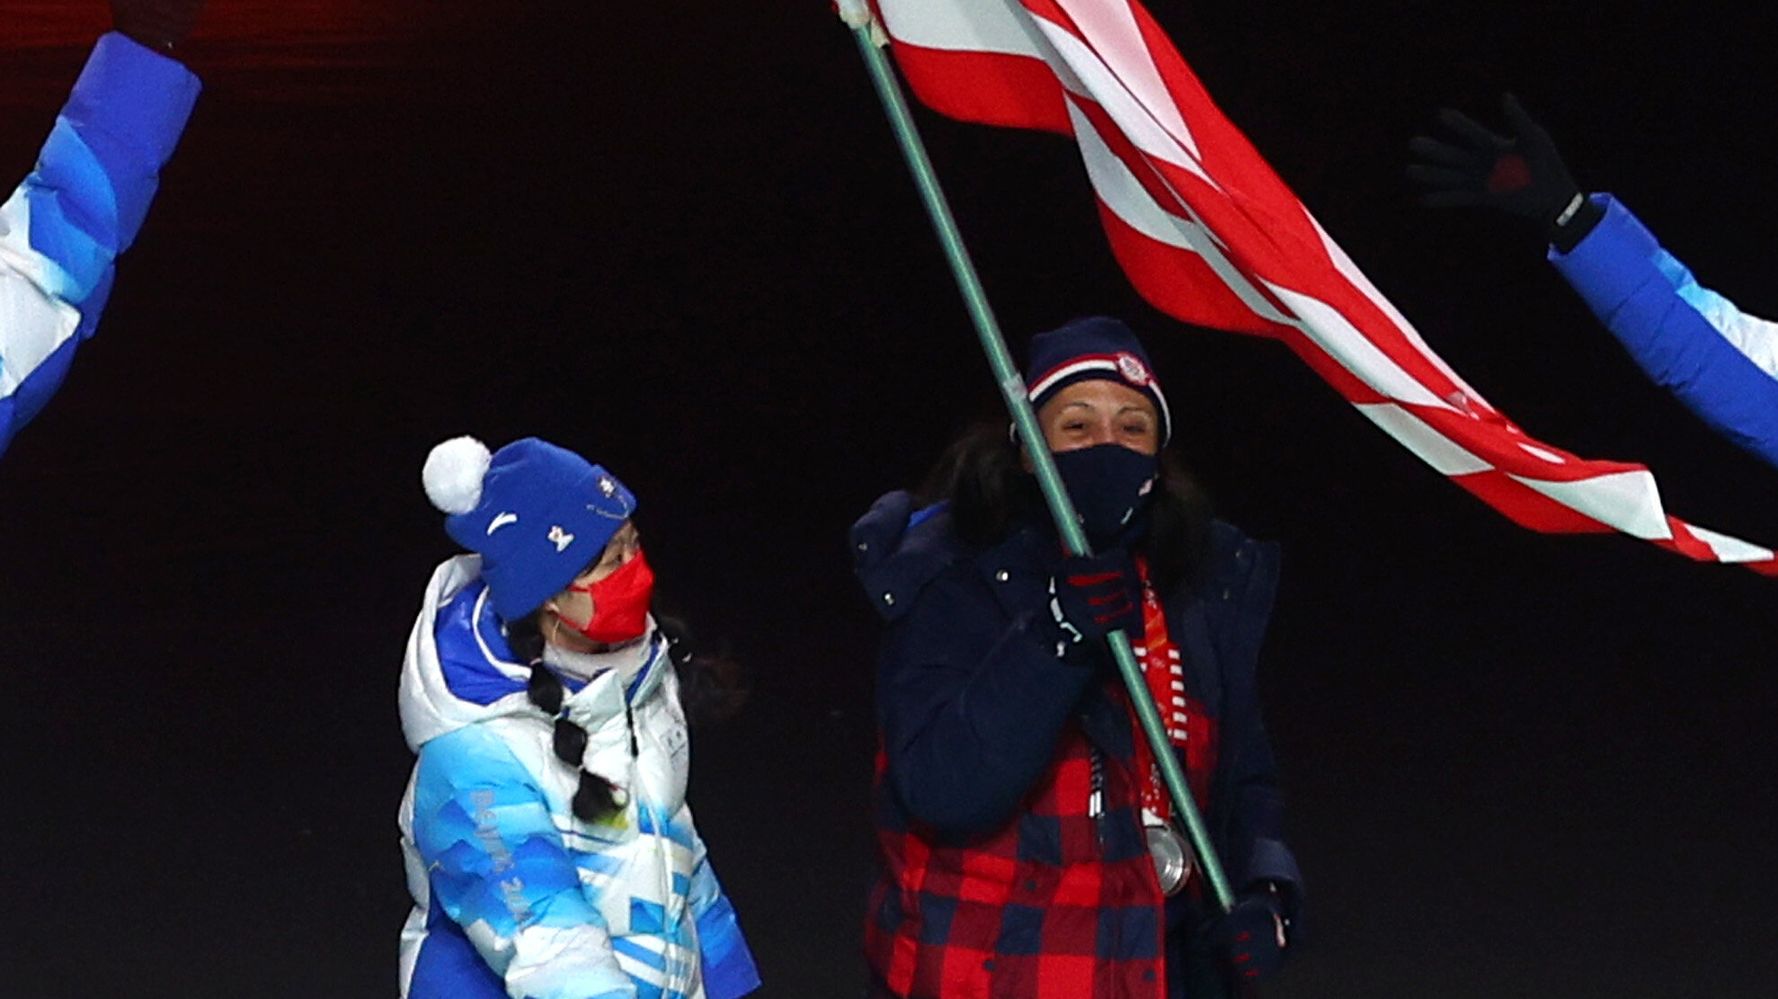 Elana Meyers Taylor Waves Flag As Most-Decorated Black Athlete In Winter Olympics History